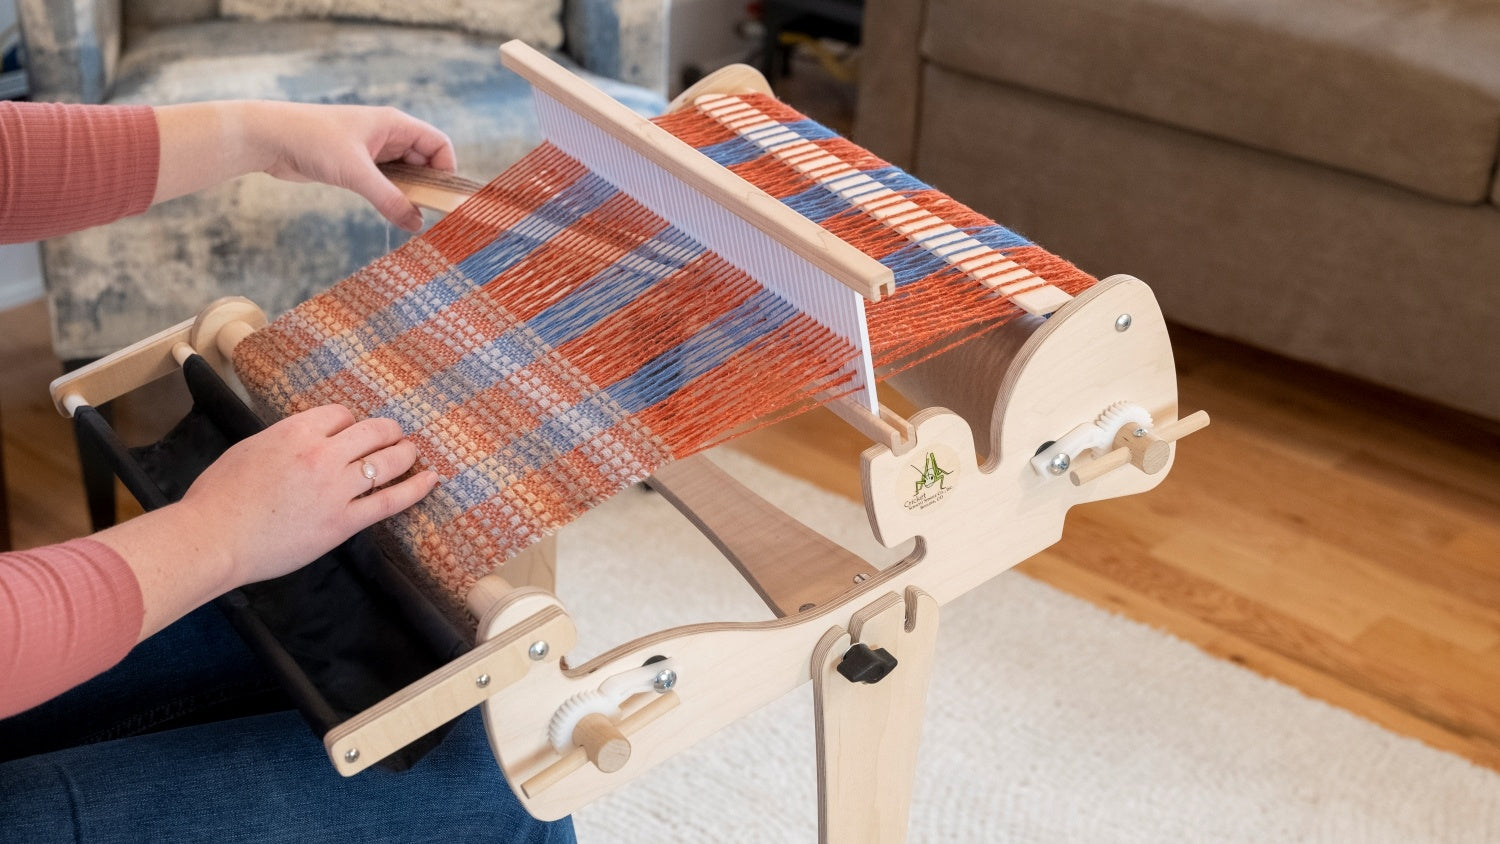 In-Person Course: Beginning Rigid Heddle Weaving April 27 &amp; 28